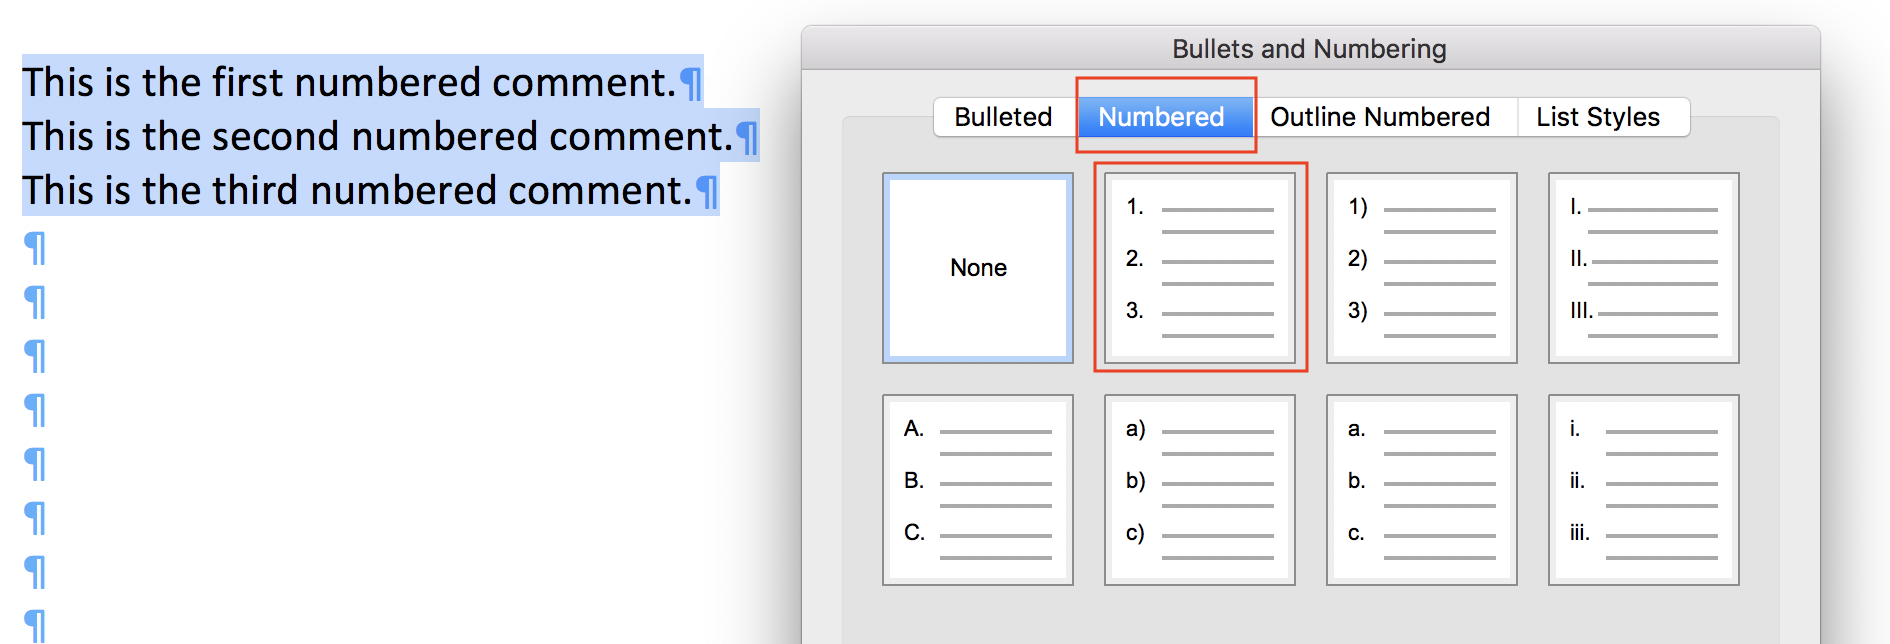 The bullets and numbering dialog